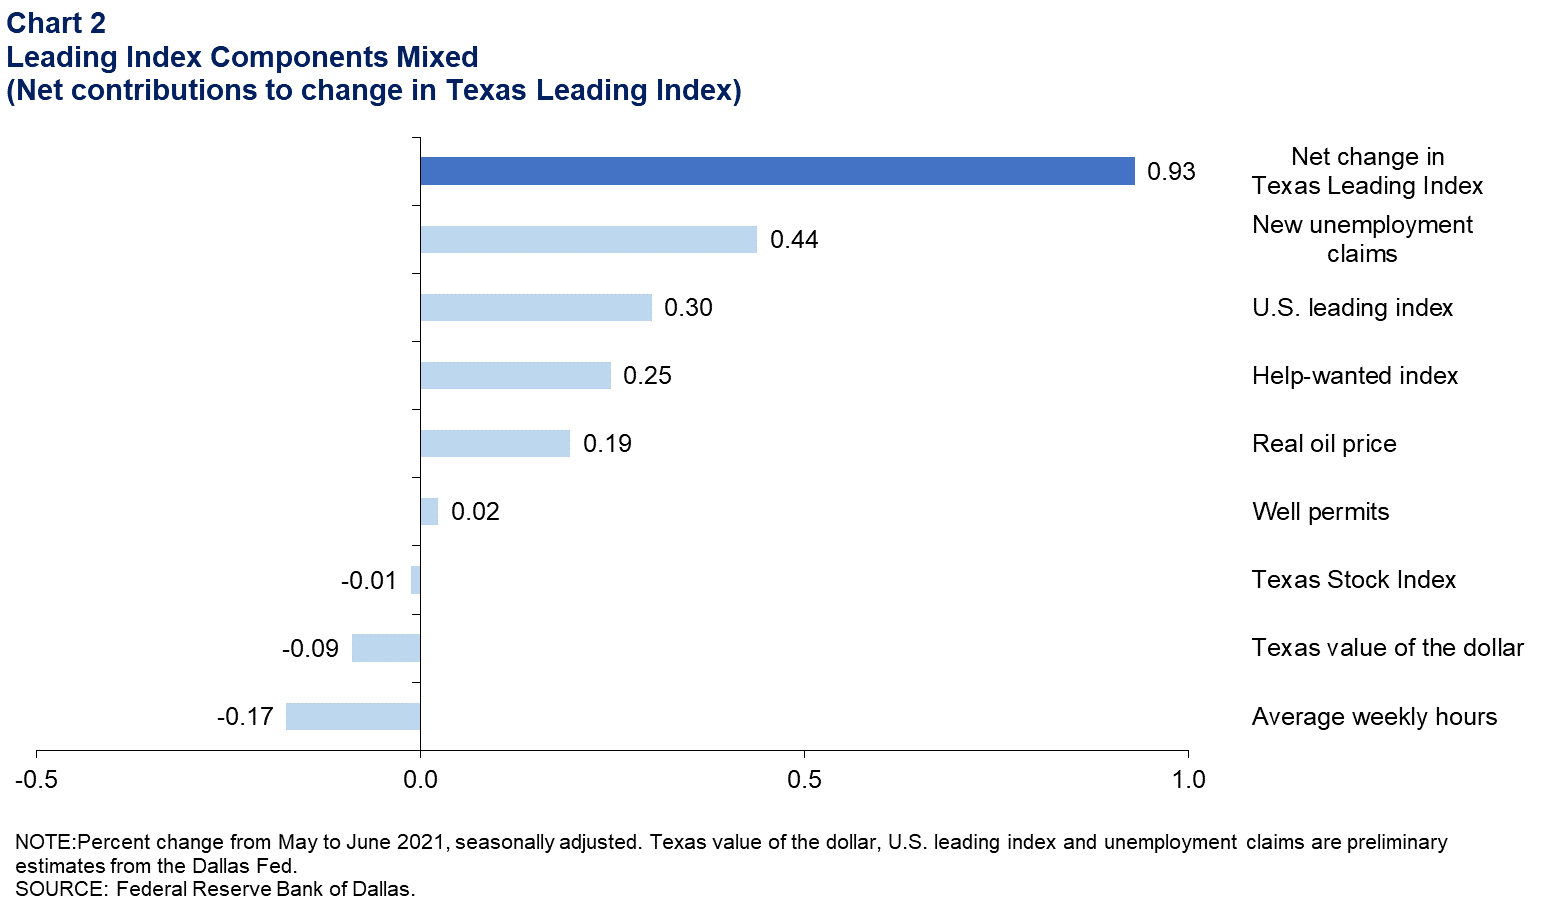 Most Leading Index Components Increasing (Net contributions to change in Texas Leading Index)